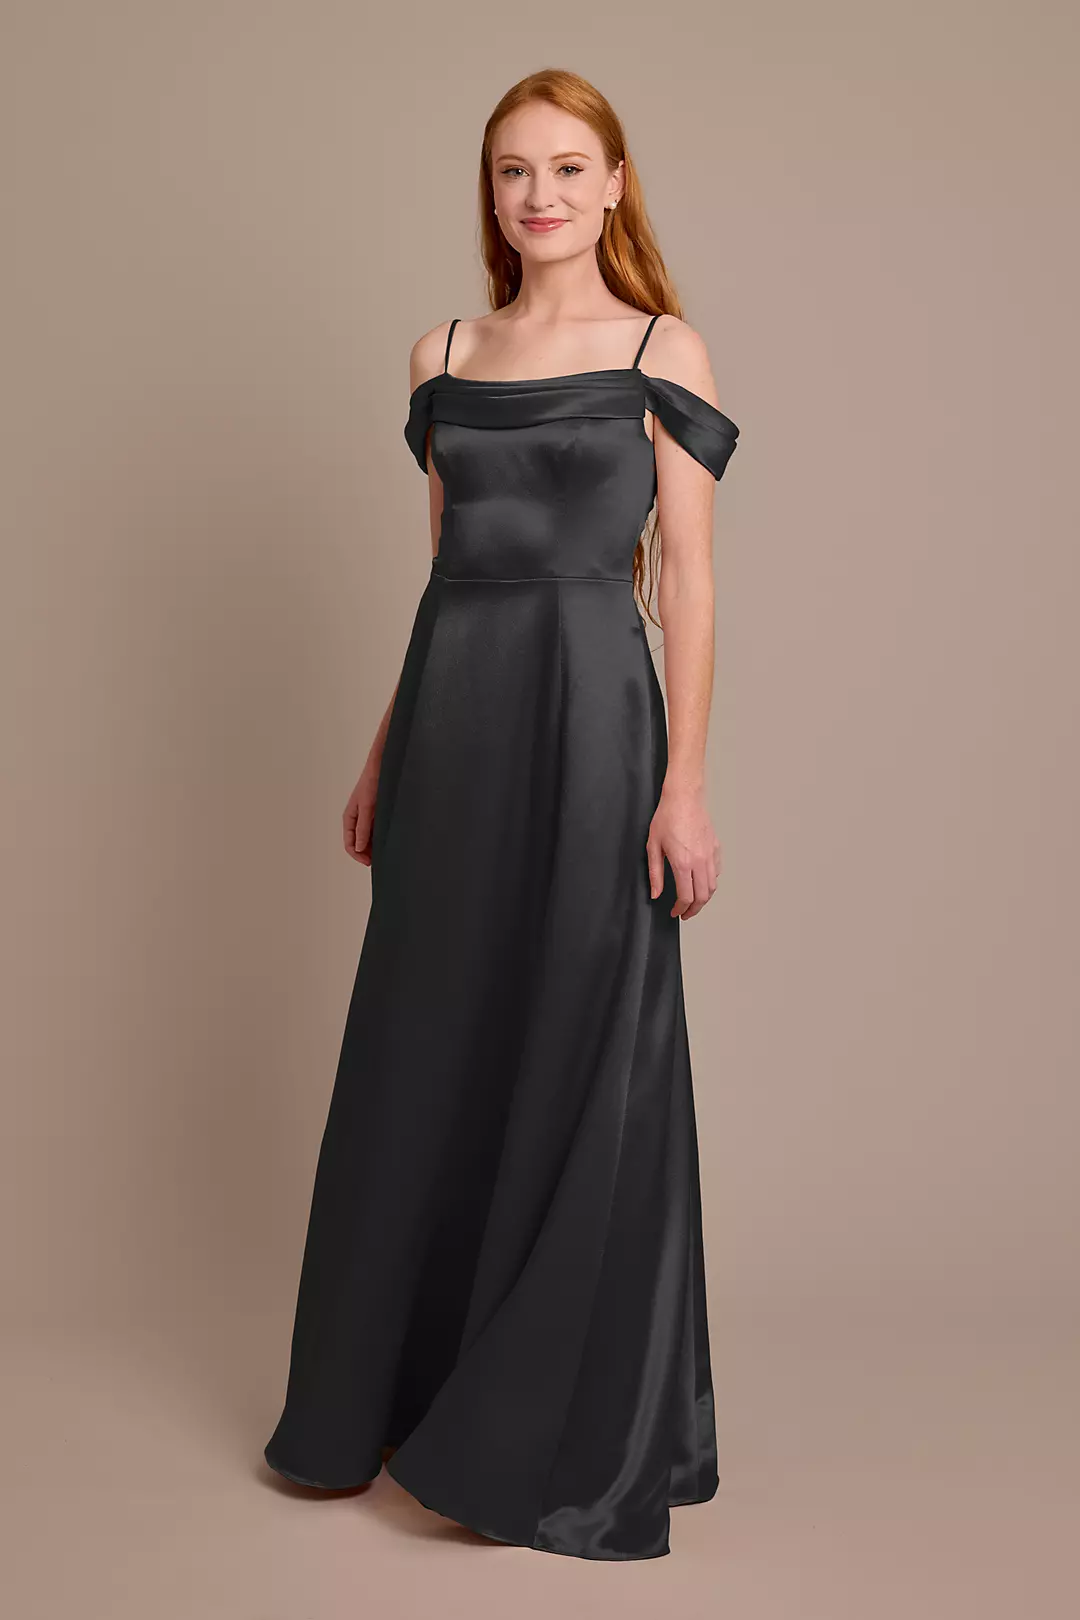 Luxe Charmeuse Off-the-Shoulder Bridesmaid Dress Image